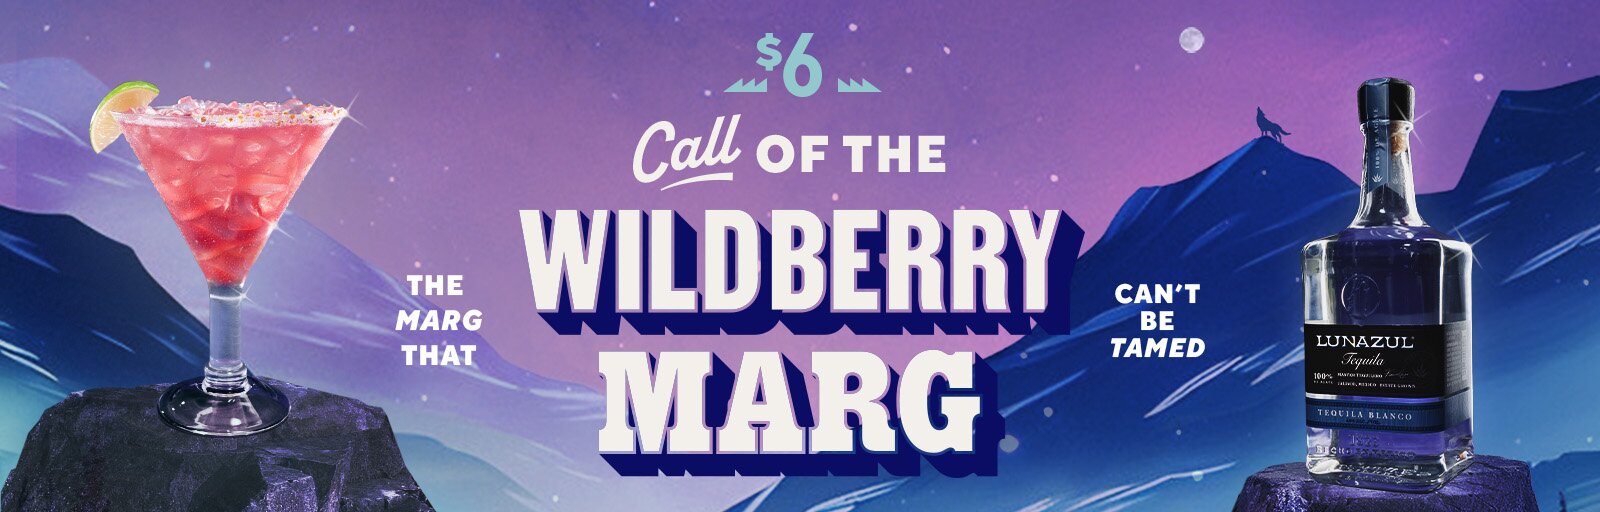 Chili's $6 November Marg of the Month the Call of the Wildberry Marg in a dreamy nighttime mountainscape 